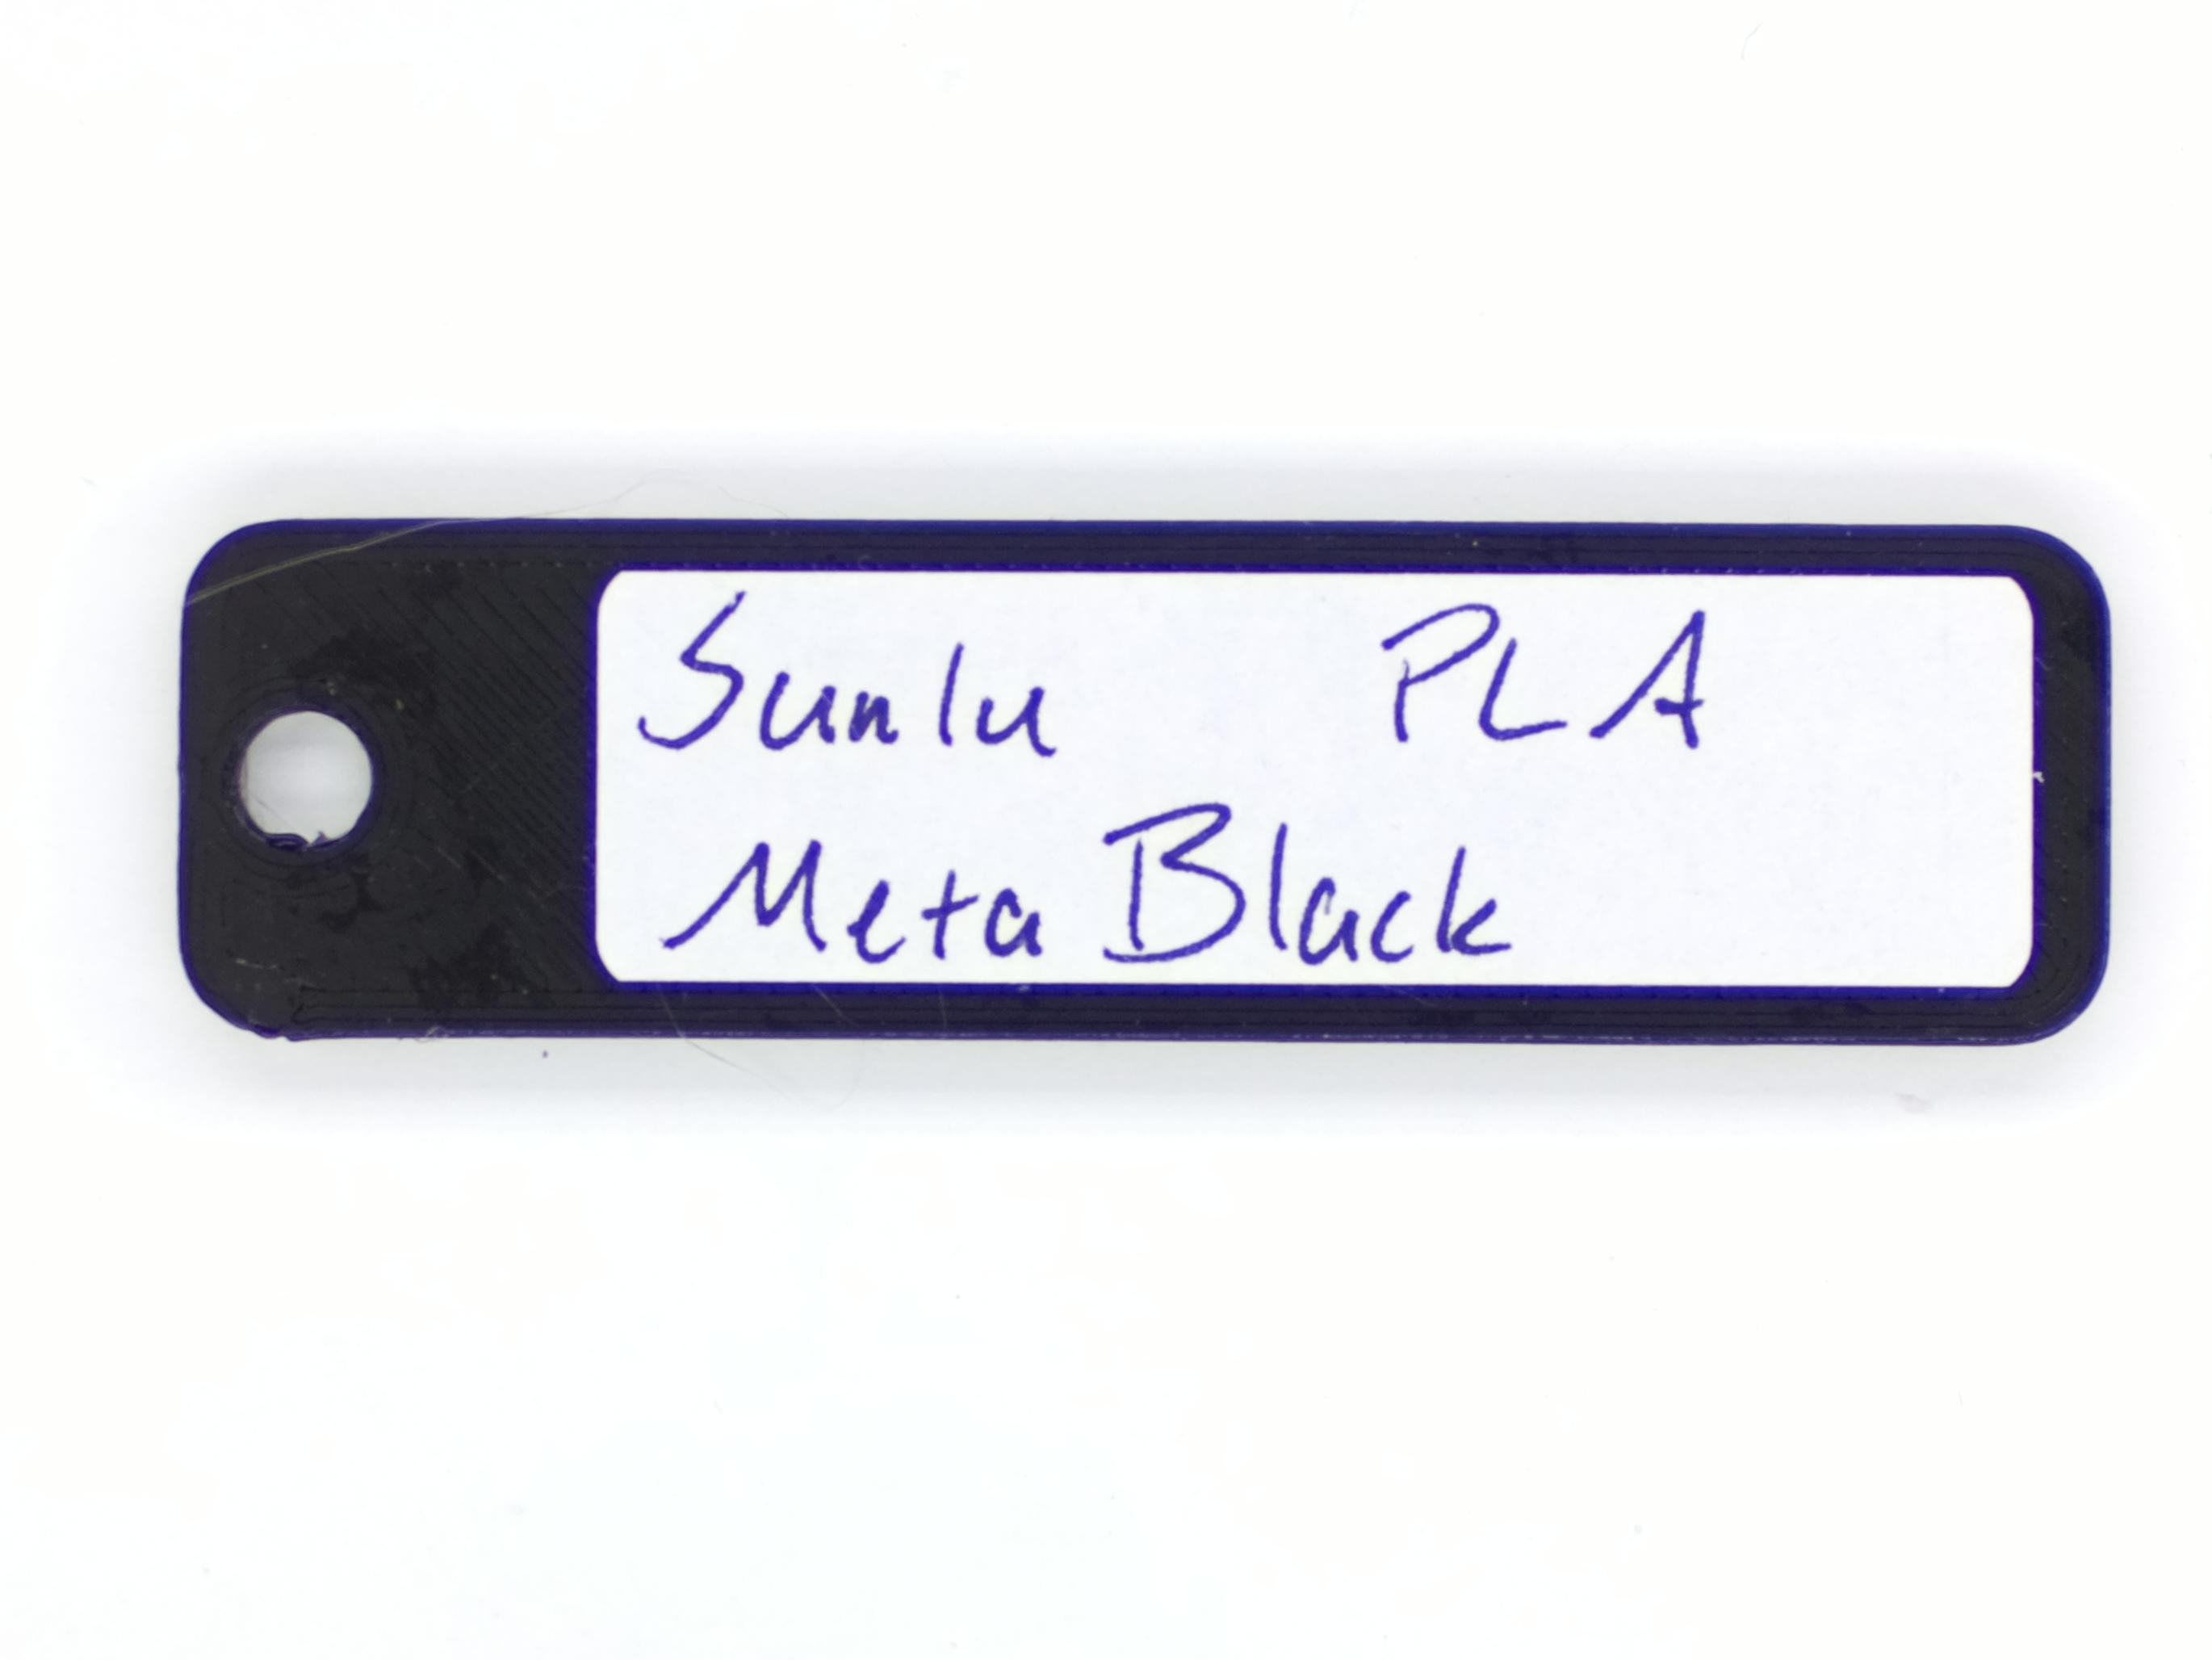 An image of the back of a color swatch, with the manufacturer, type, and color written on it.